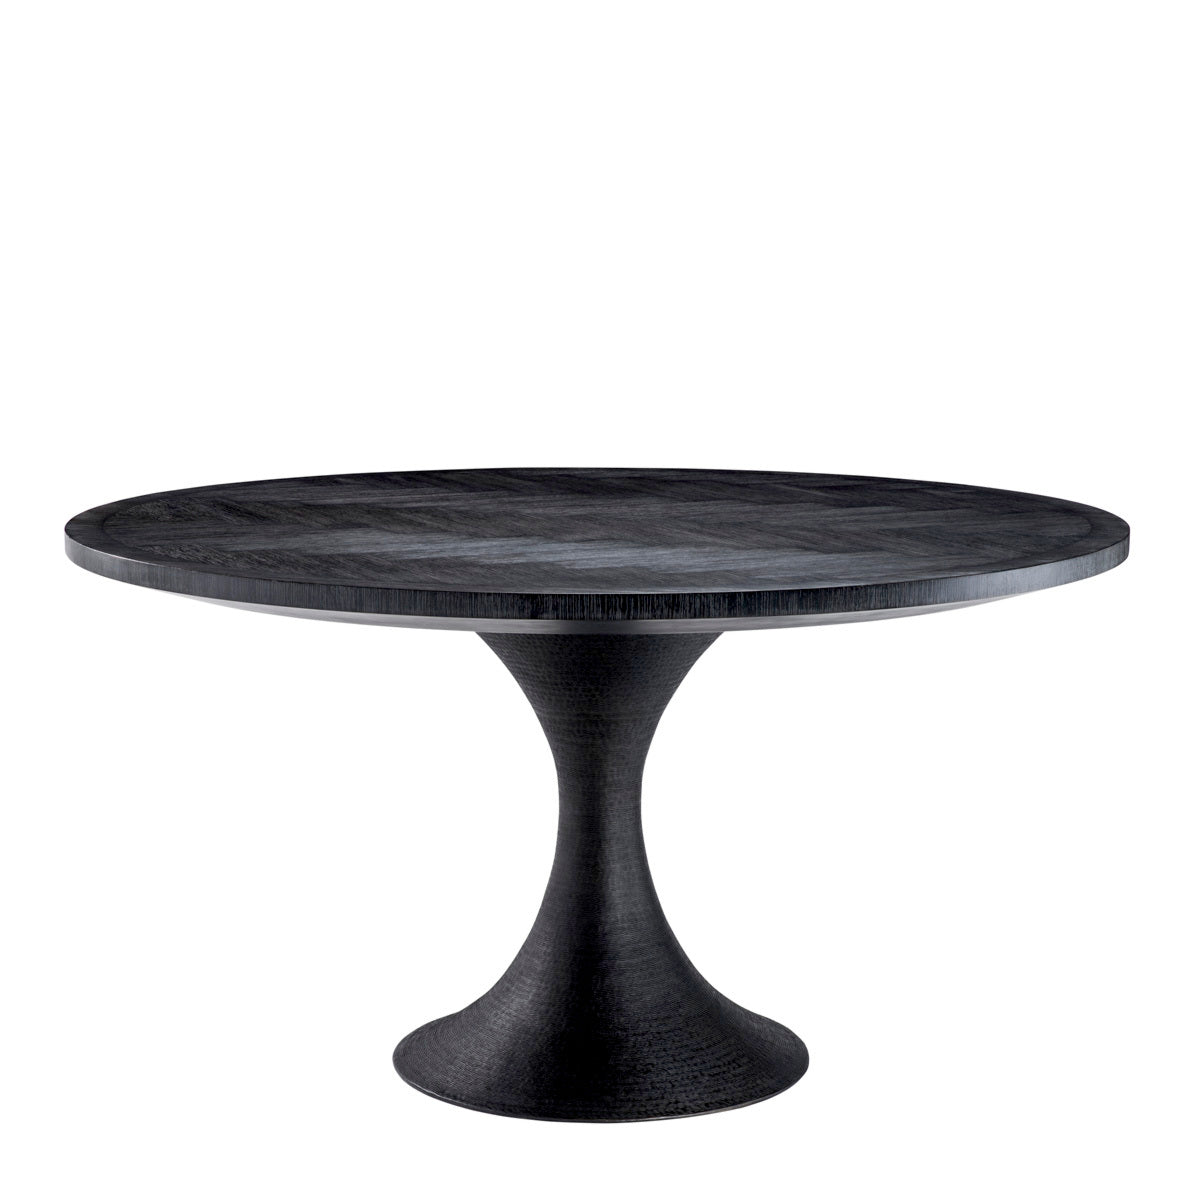 Dining table Eichholtz Melchior round charcoal oak